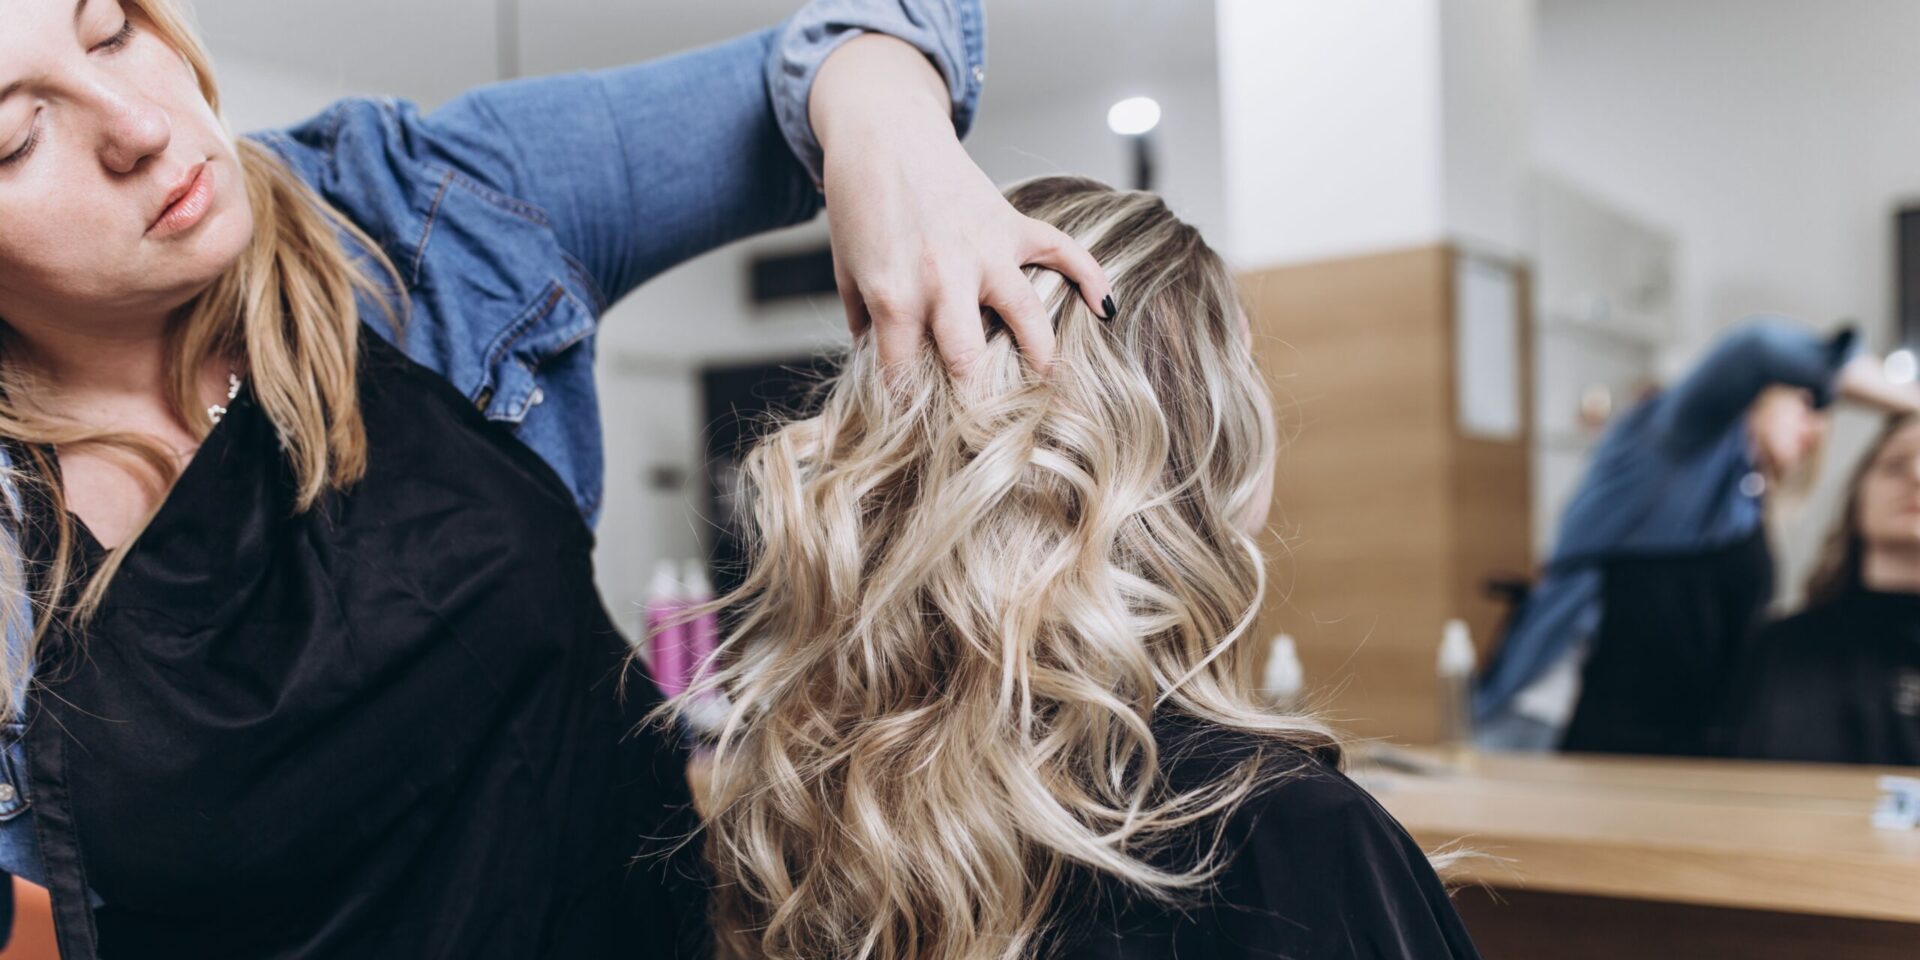 25 Name Ideas for a Hair Business